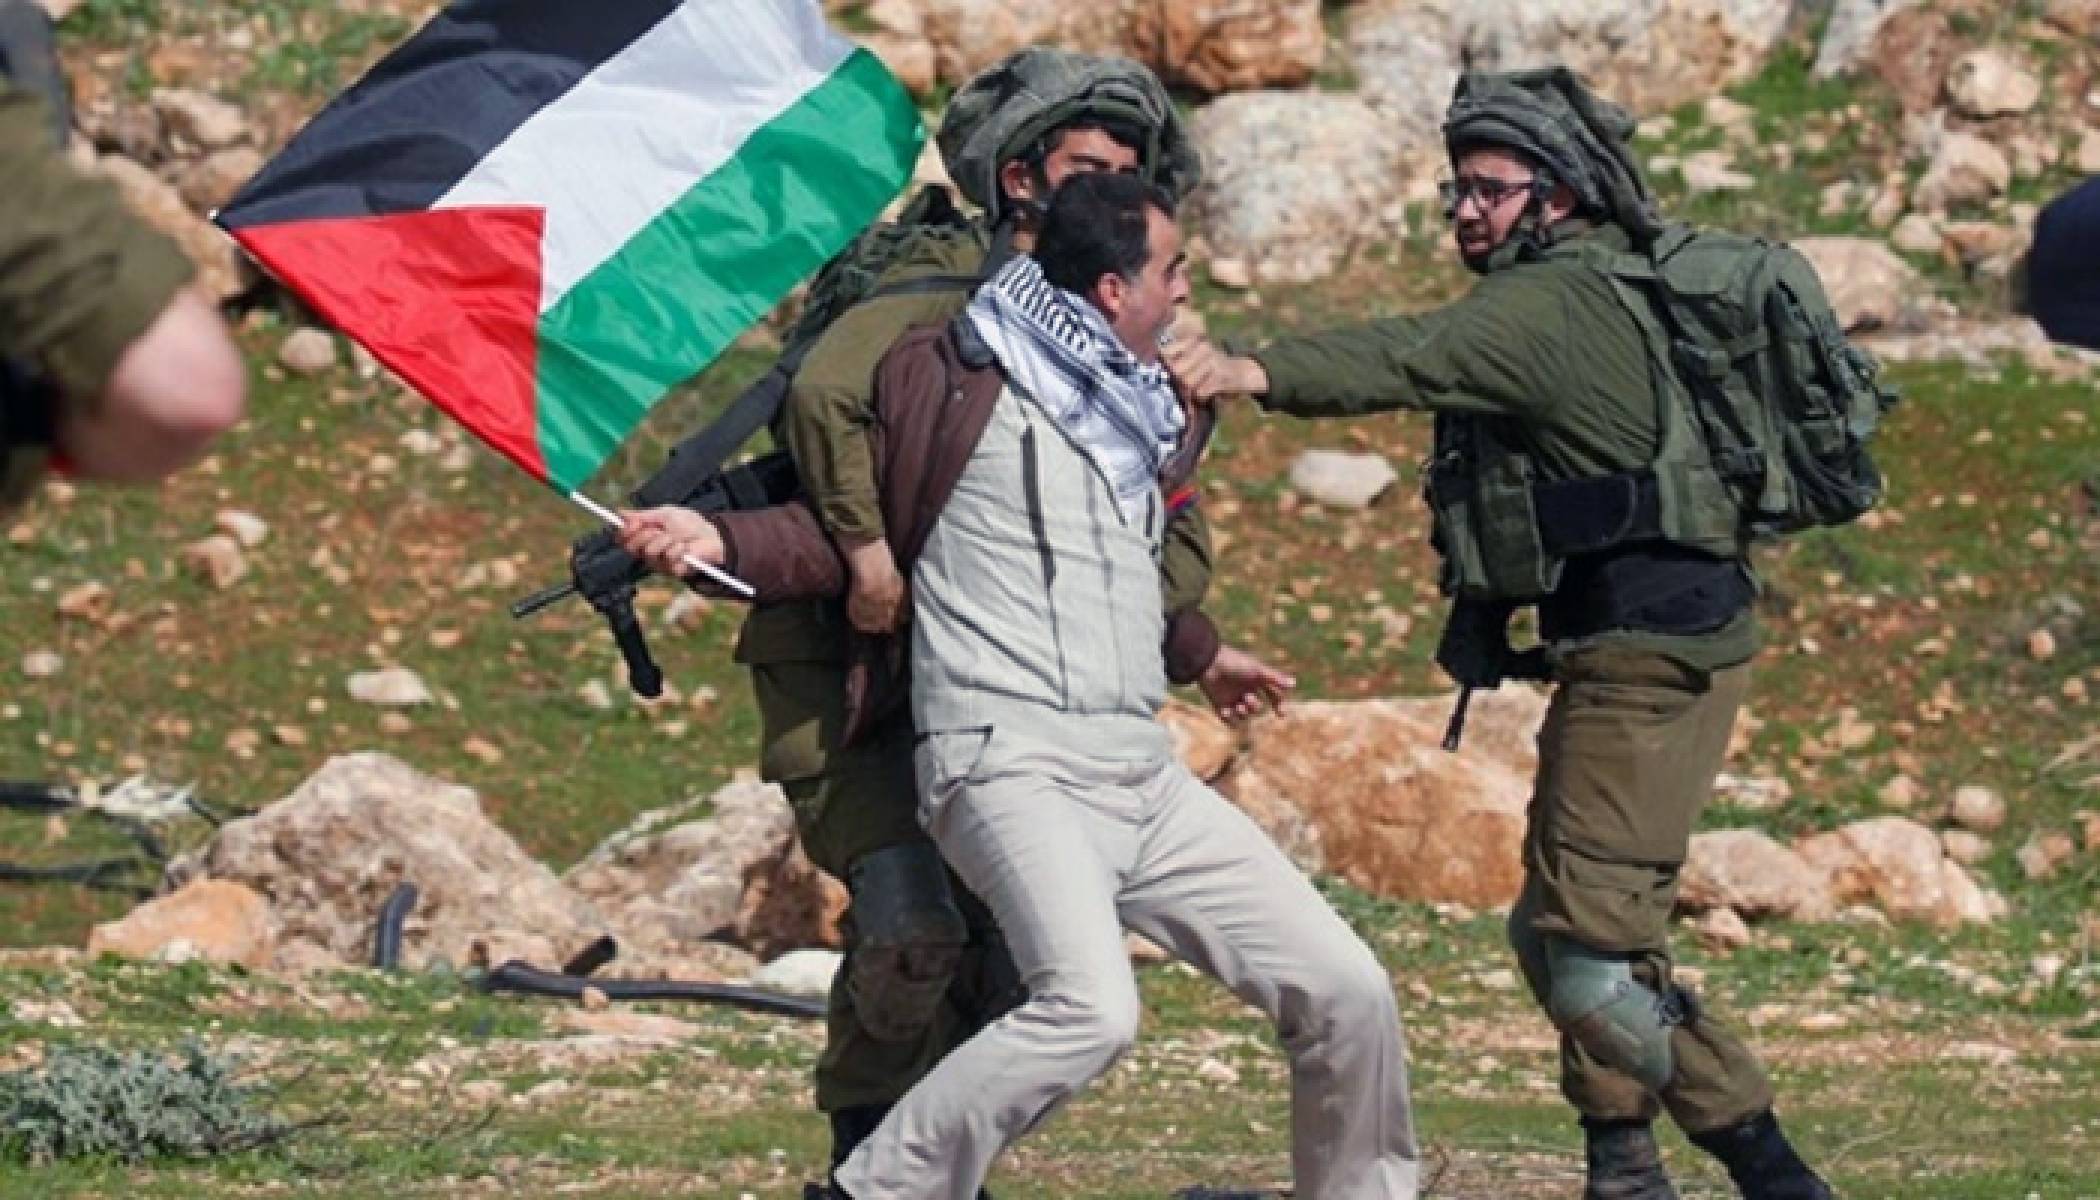 Where does the Israeli army derive its brutality from? Fact and facts